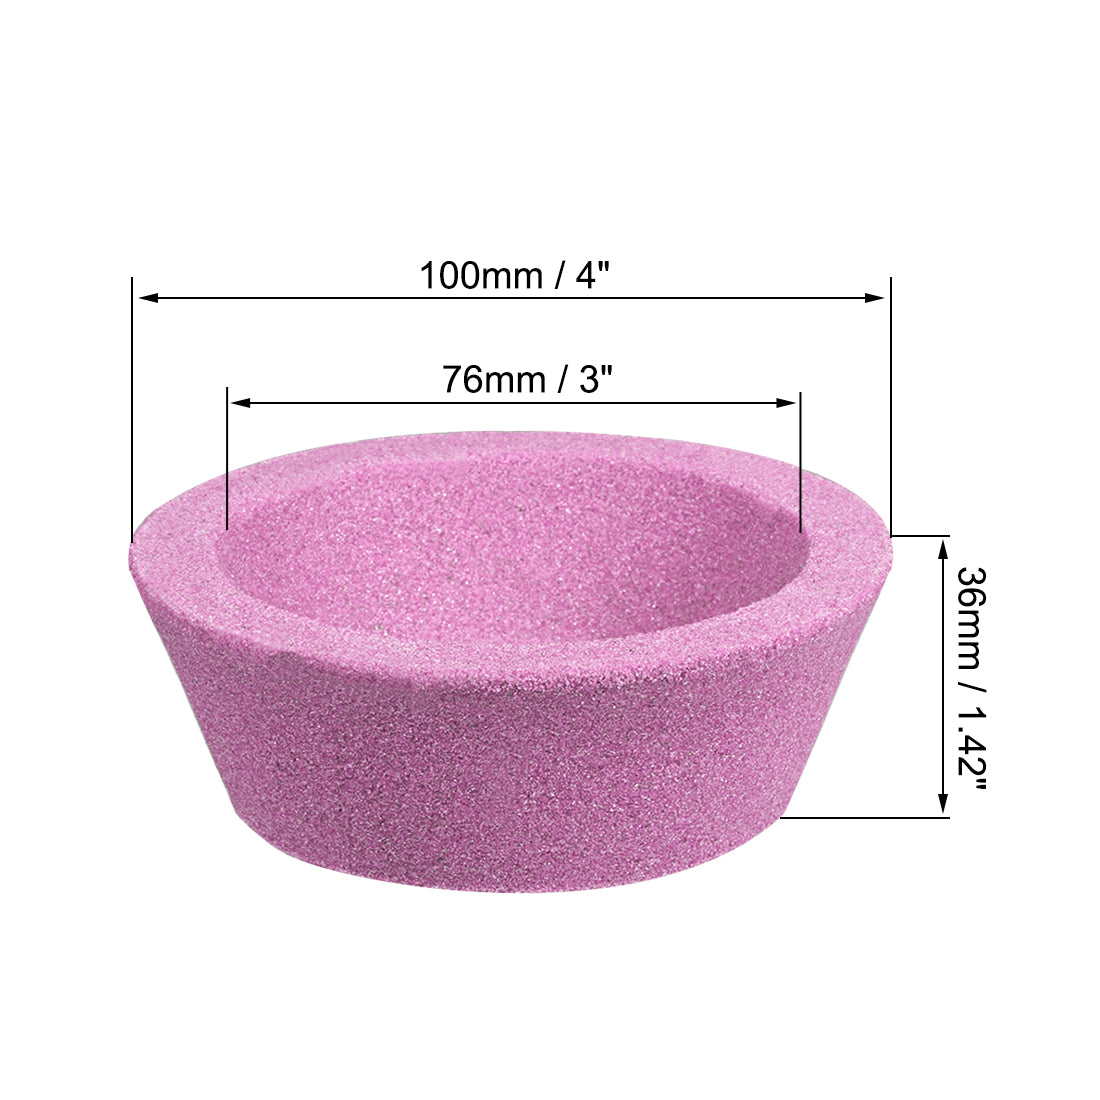 uxcell Uxcell 4-Inch Flaring Cup Grinding Wheel 80 Grits Pink Aluminum Oxide PA Surface Grinding Ceramic Tools